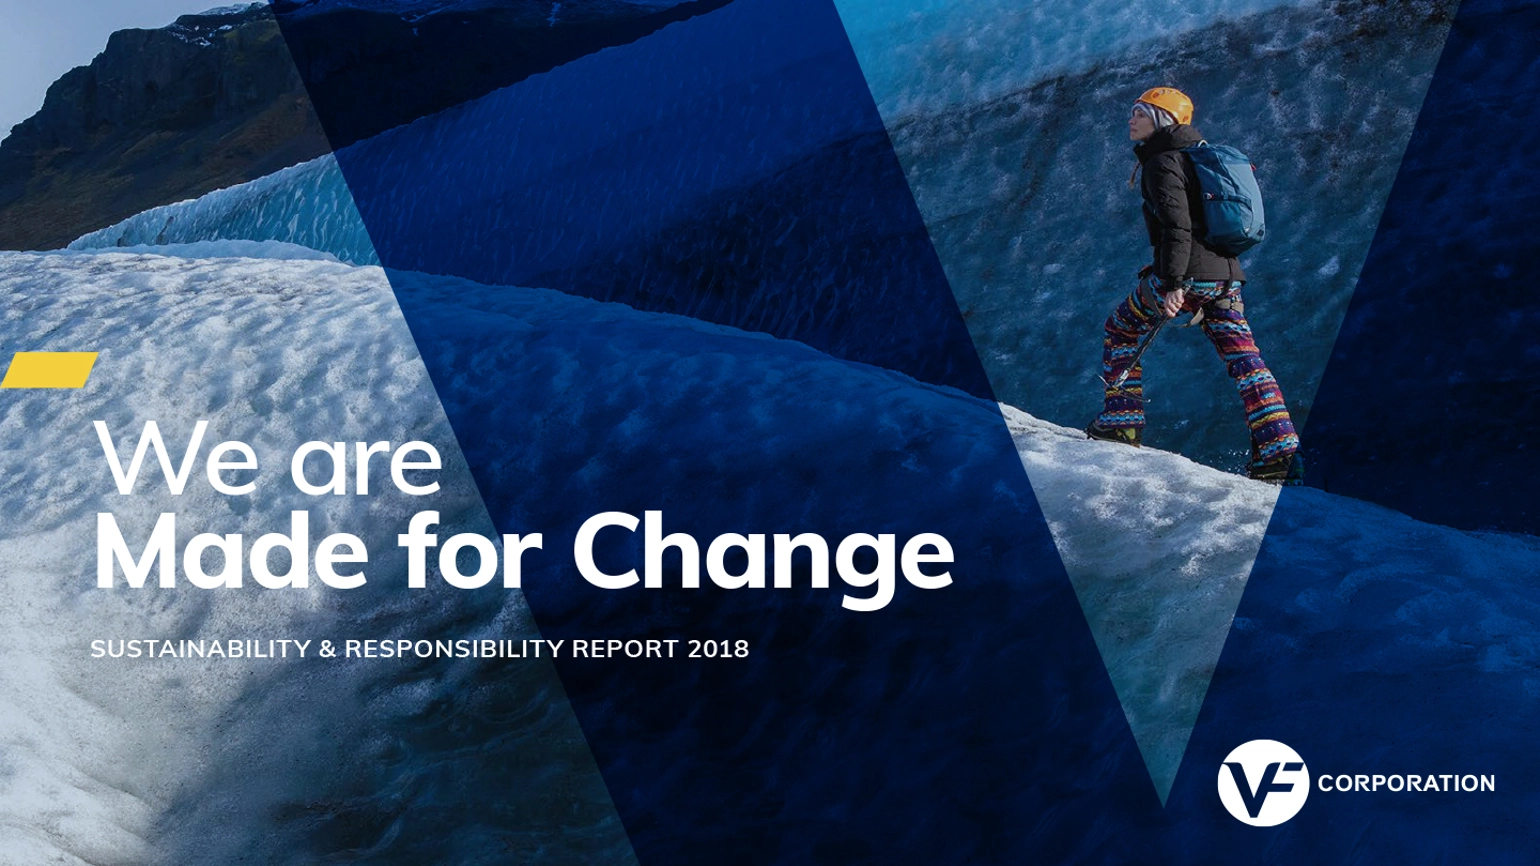 The cover page of VF sustainability and responsibility report 2018